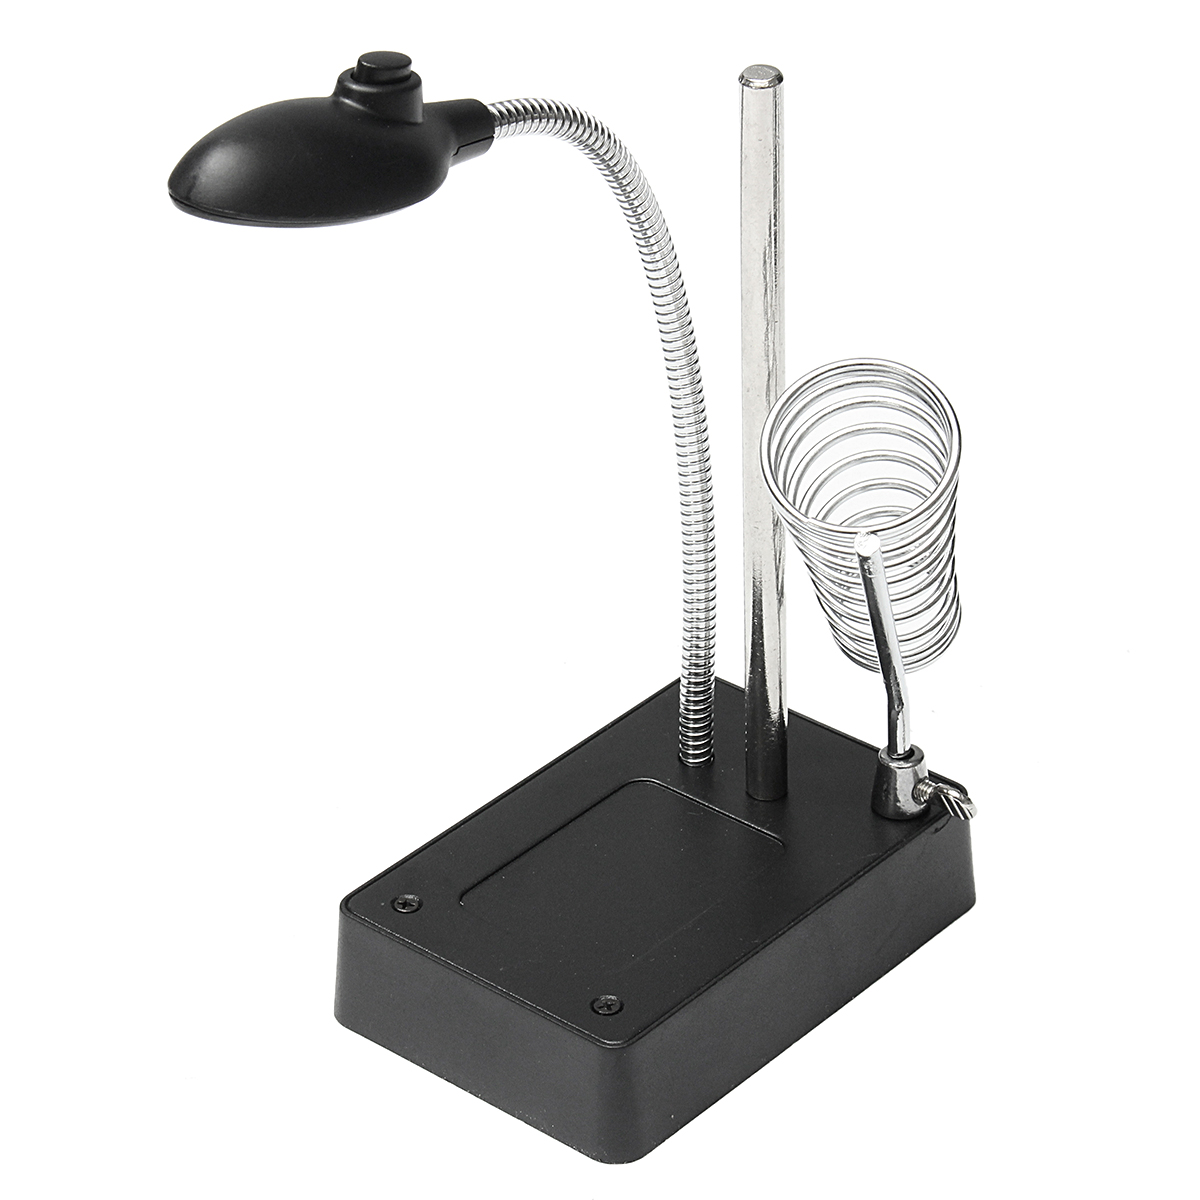 5-LED-Light-Magnifier-Magnifying-Glass-Helping-Hand-Soldering-Stand-with-3-Lens-1121941-5